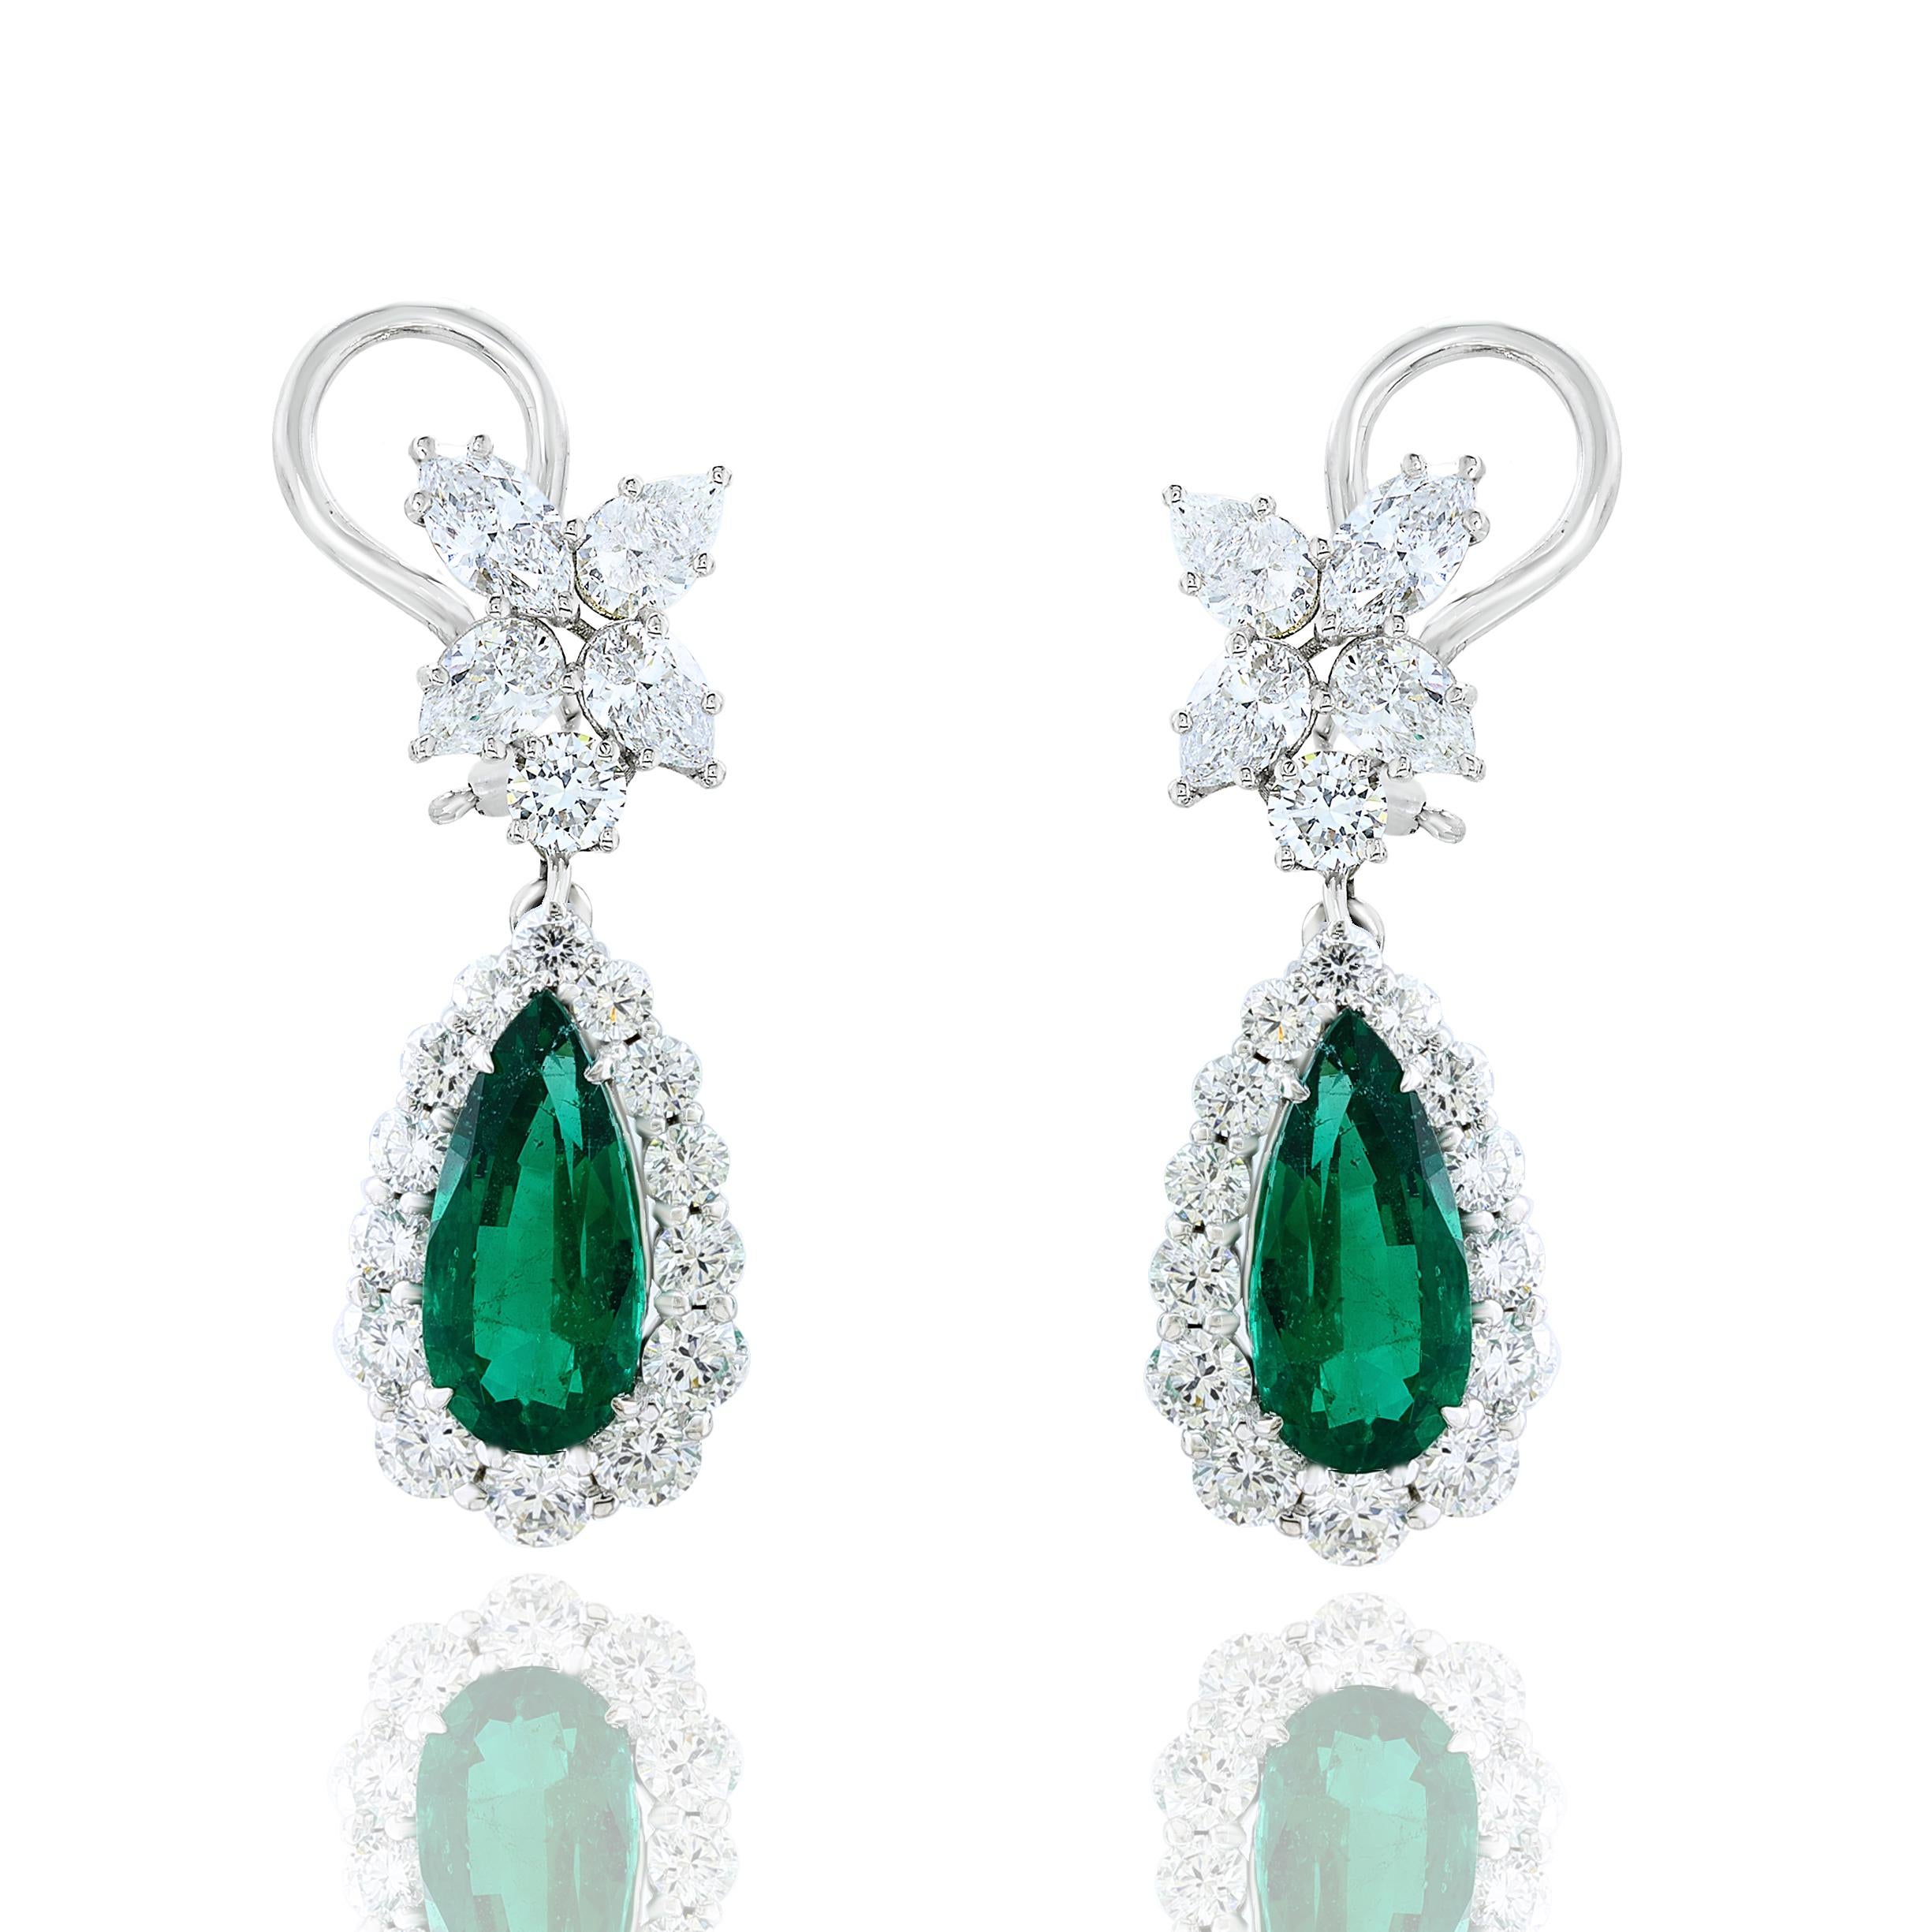 A beautiful and chic pair of drop earrings showcasing a cluster of brilliant mixed-cut diamonds, and pear shaped Emerald set in an intricate and stylish design. 8 Mixed cut Diamonds weigh 1.59 carats in total.   2 Emeralds weigh 4.80 carats in